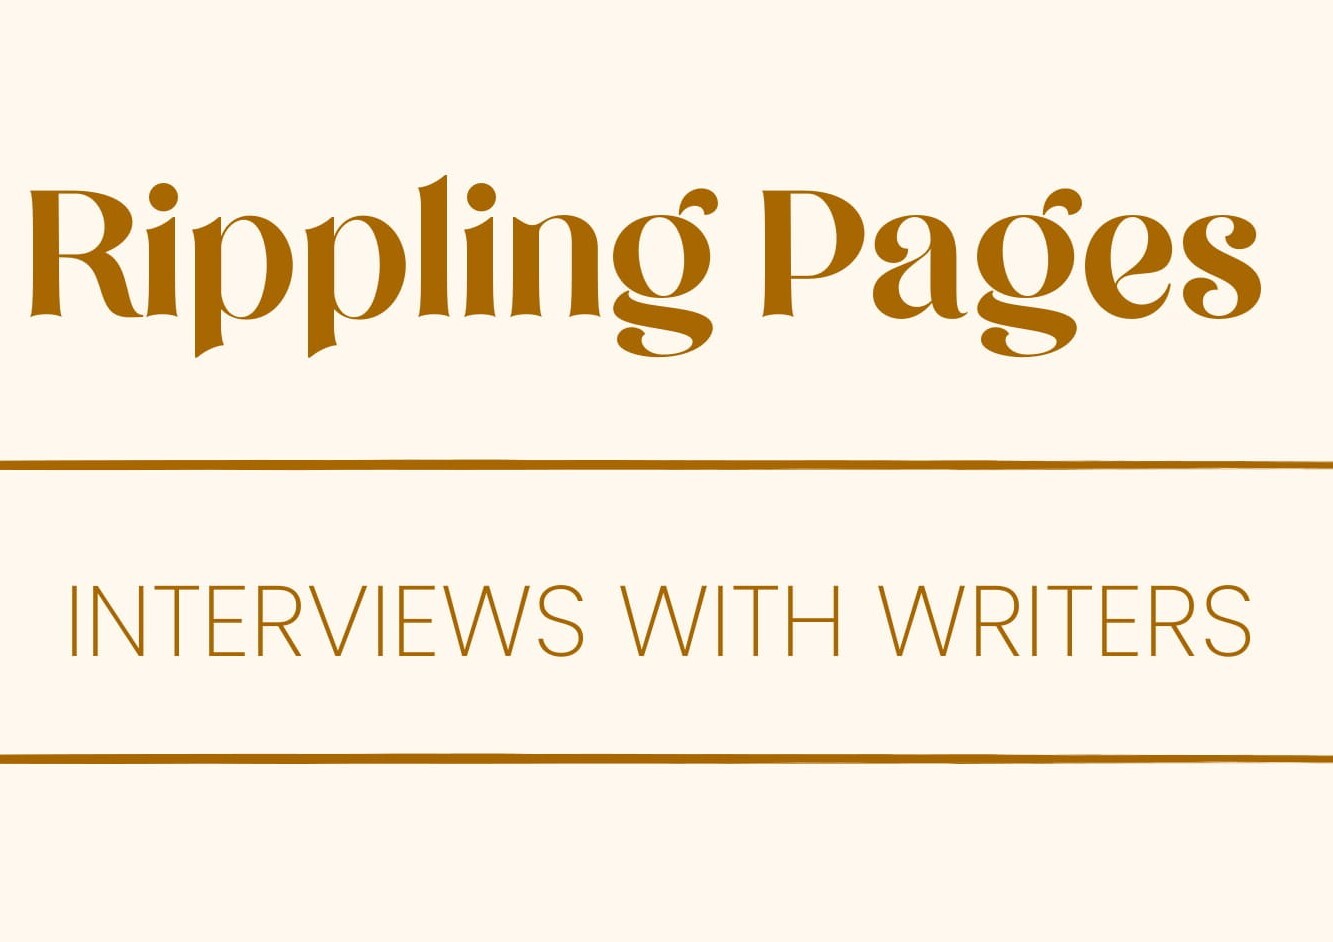 Rippling Pages: Interviews with Writers